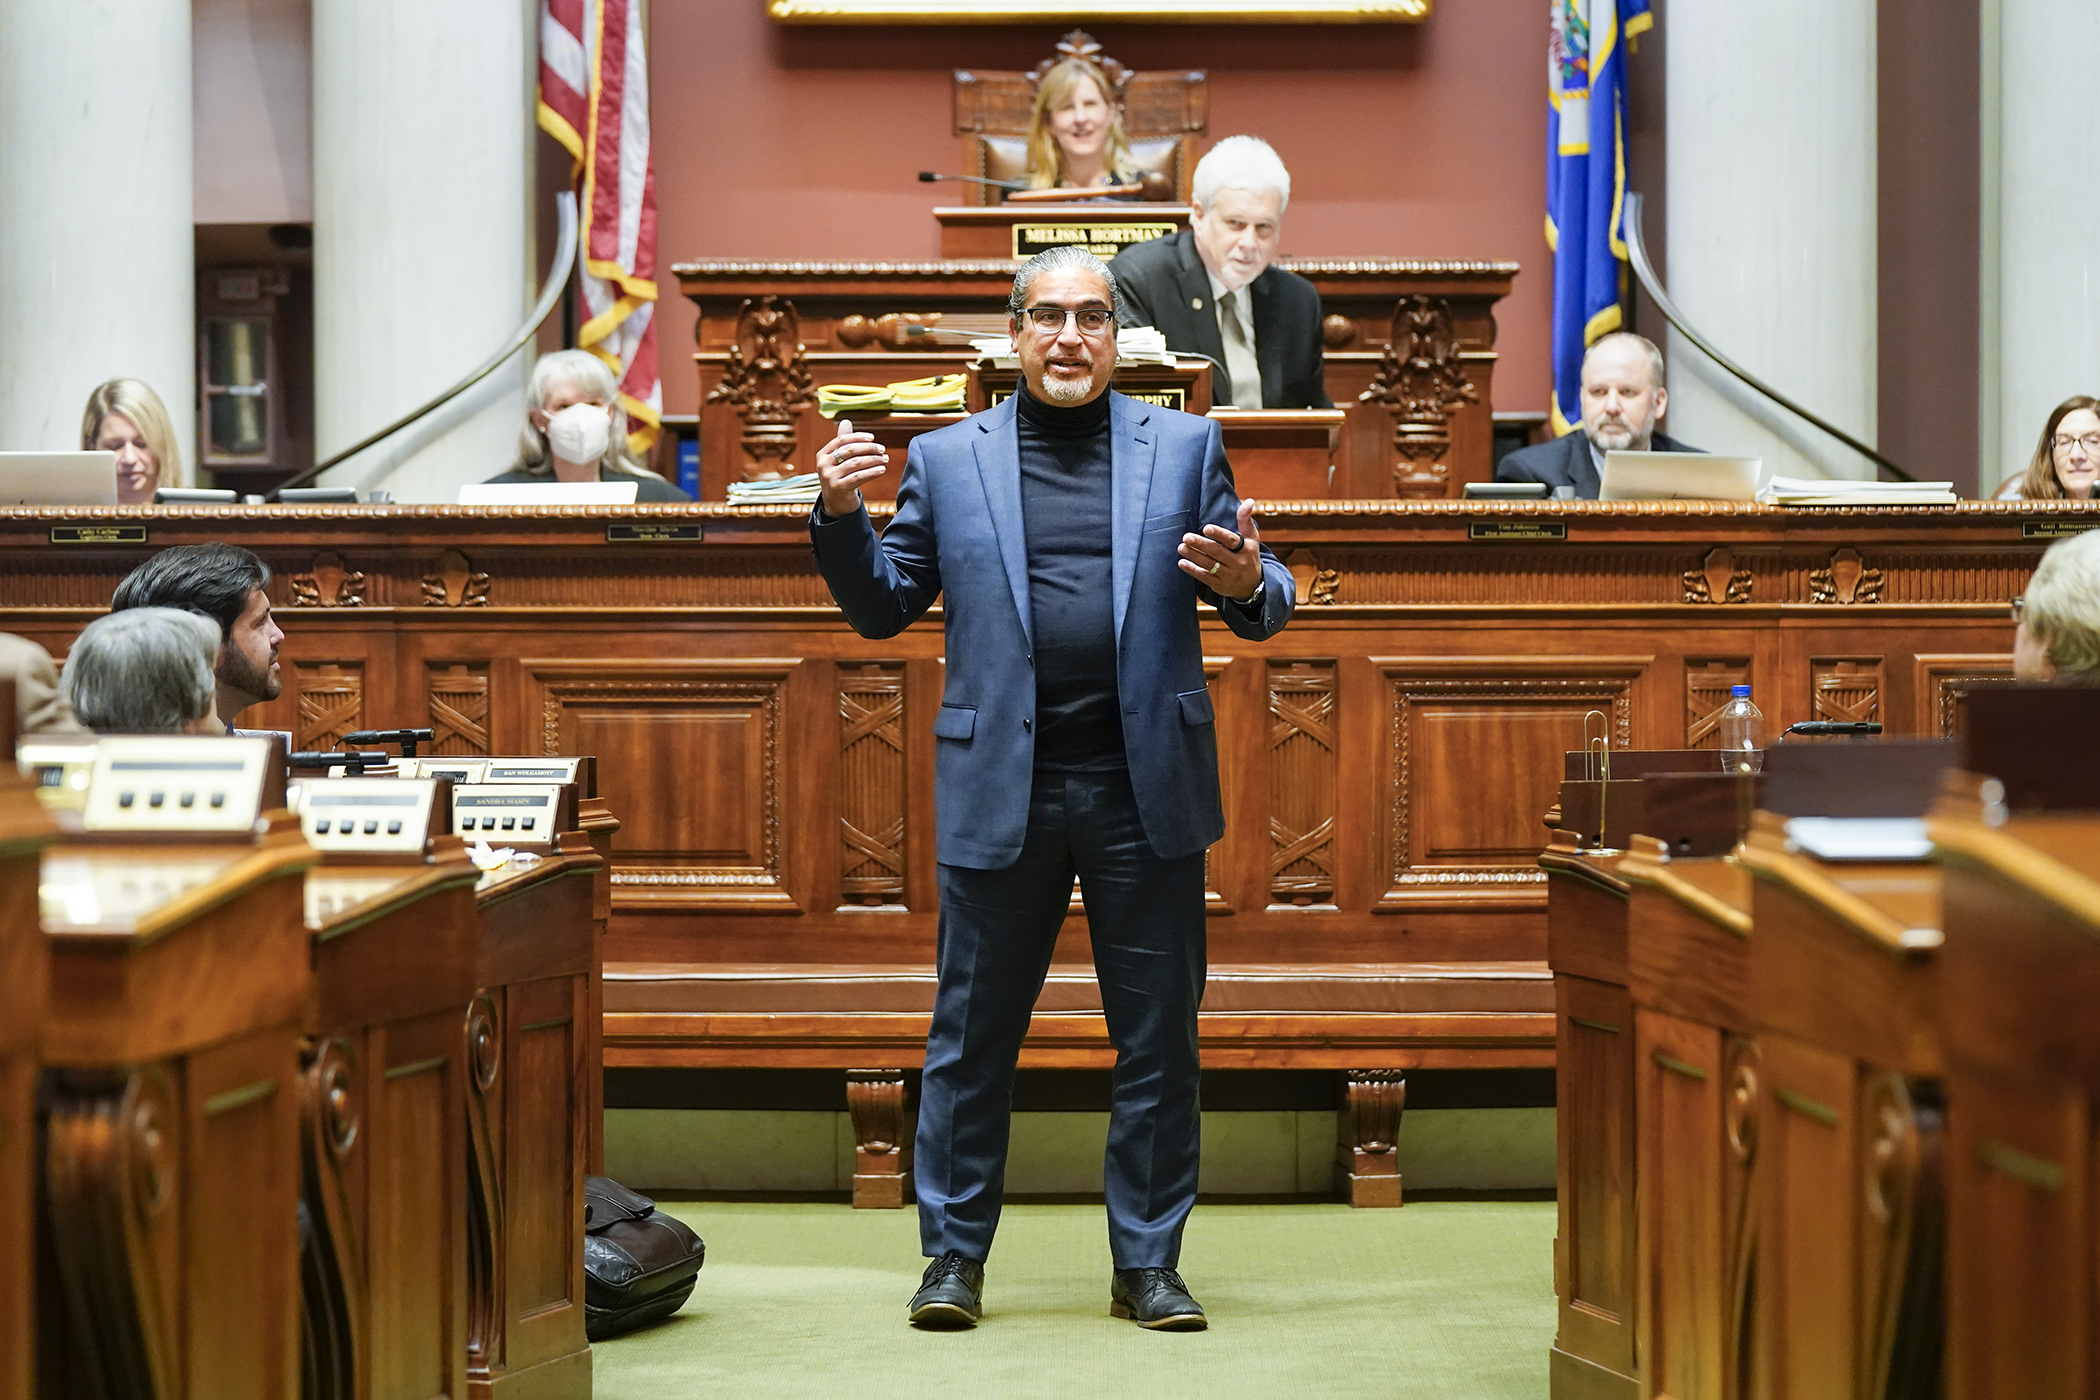 Rep. Carlos Mariani delivers part of his May 23 retirement speech from the “Well of the House,” reviving the tradition of speaking at the front of the Chamber before there were microphones and amplification. (Photo by Paul Battaglia)